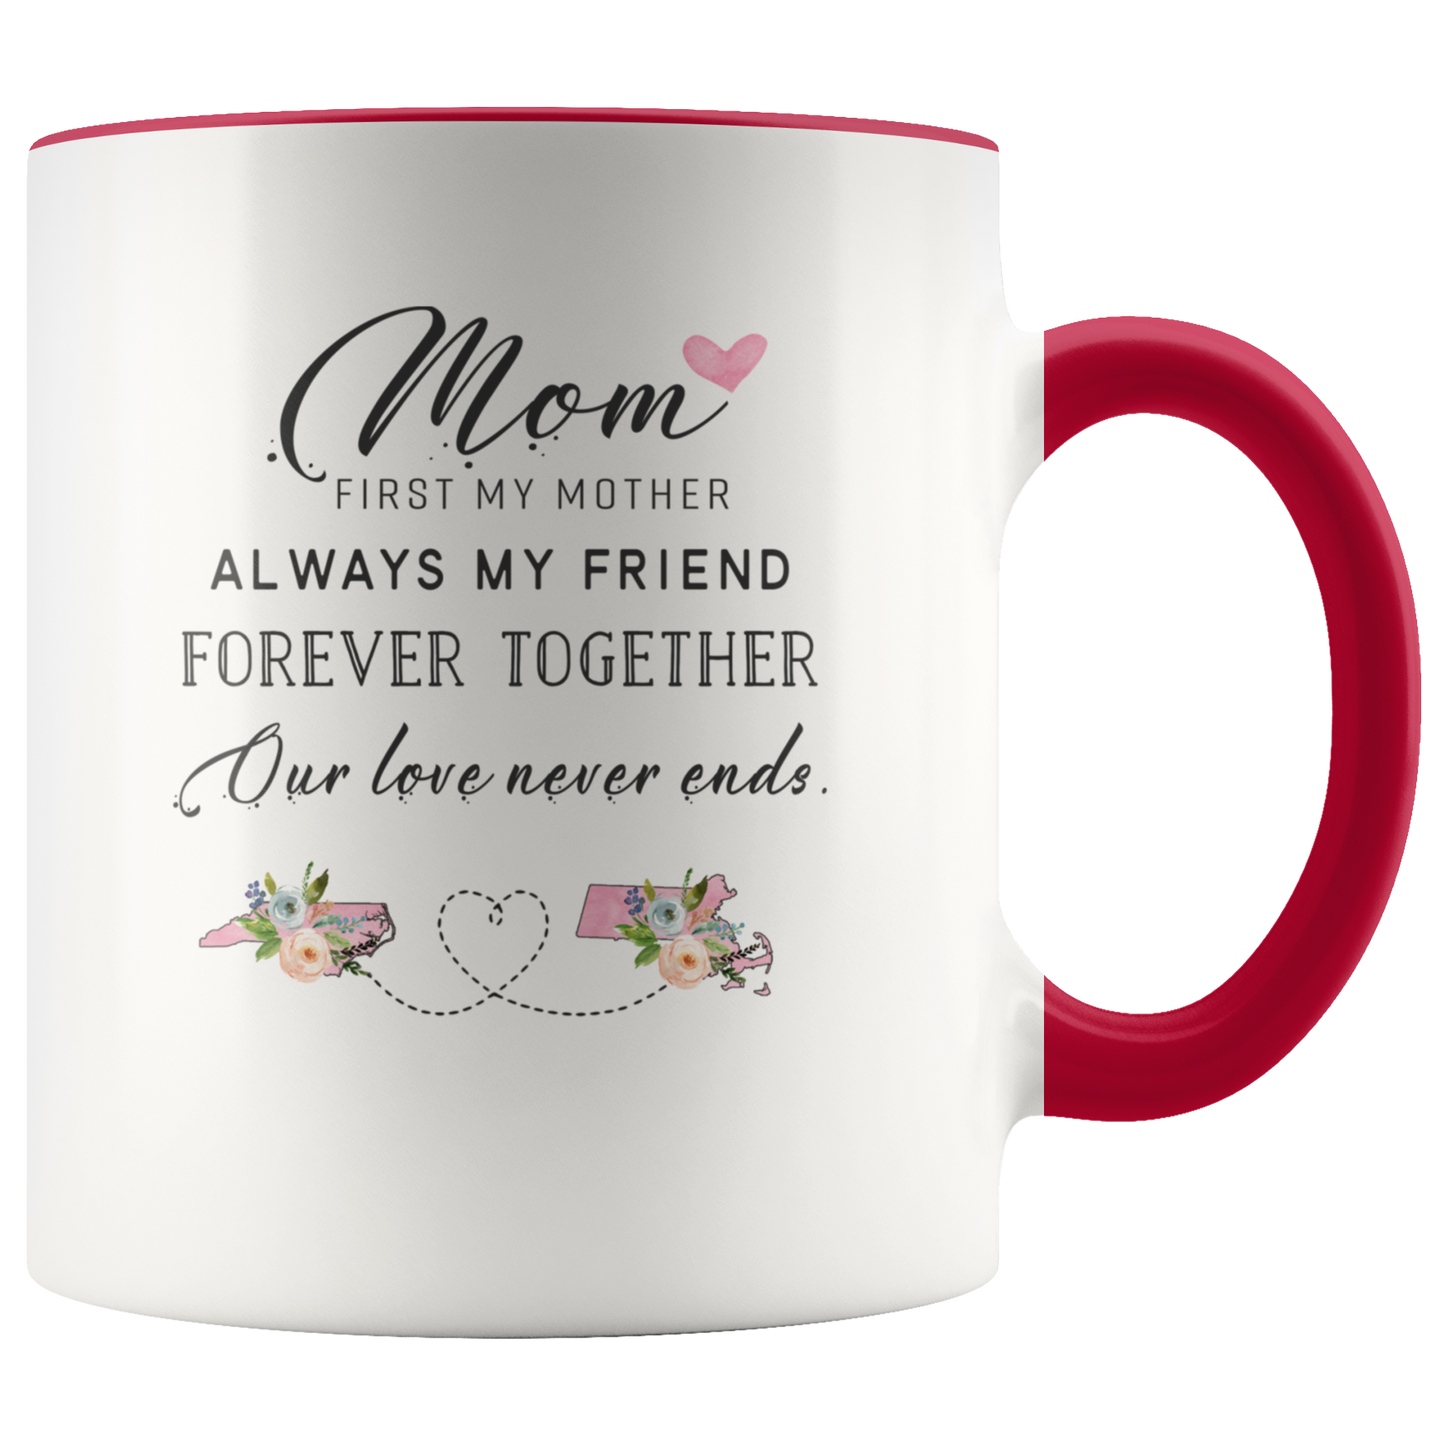 ND-21359198-sp-23808 - [ North Carolina | Massachusetts ]Mothers Day Accent Mug Red - Mom, First My Mother Always My